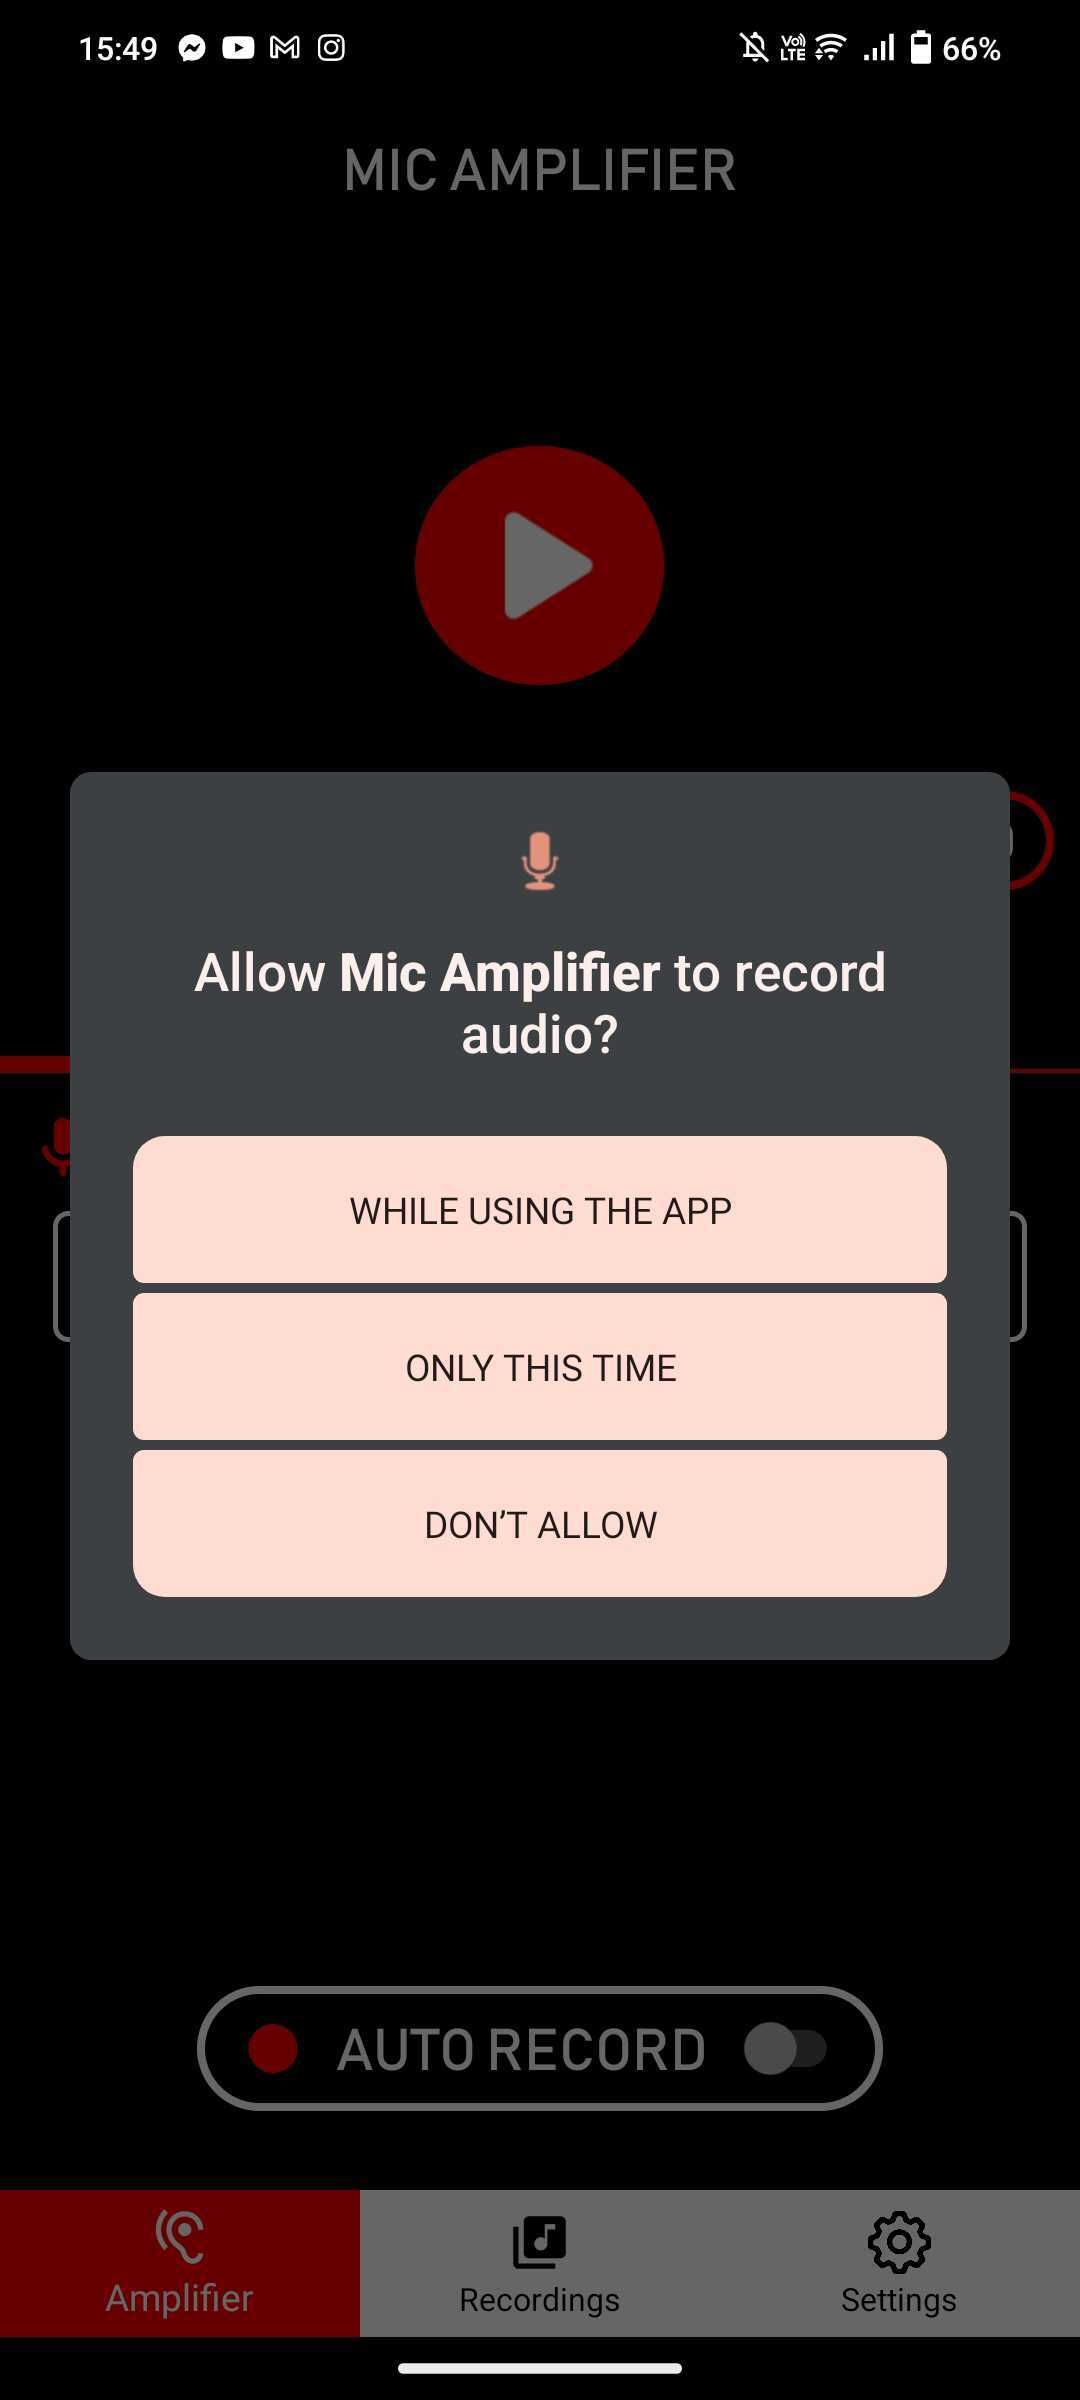 Mic Amplifier on Android permissions